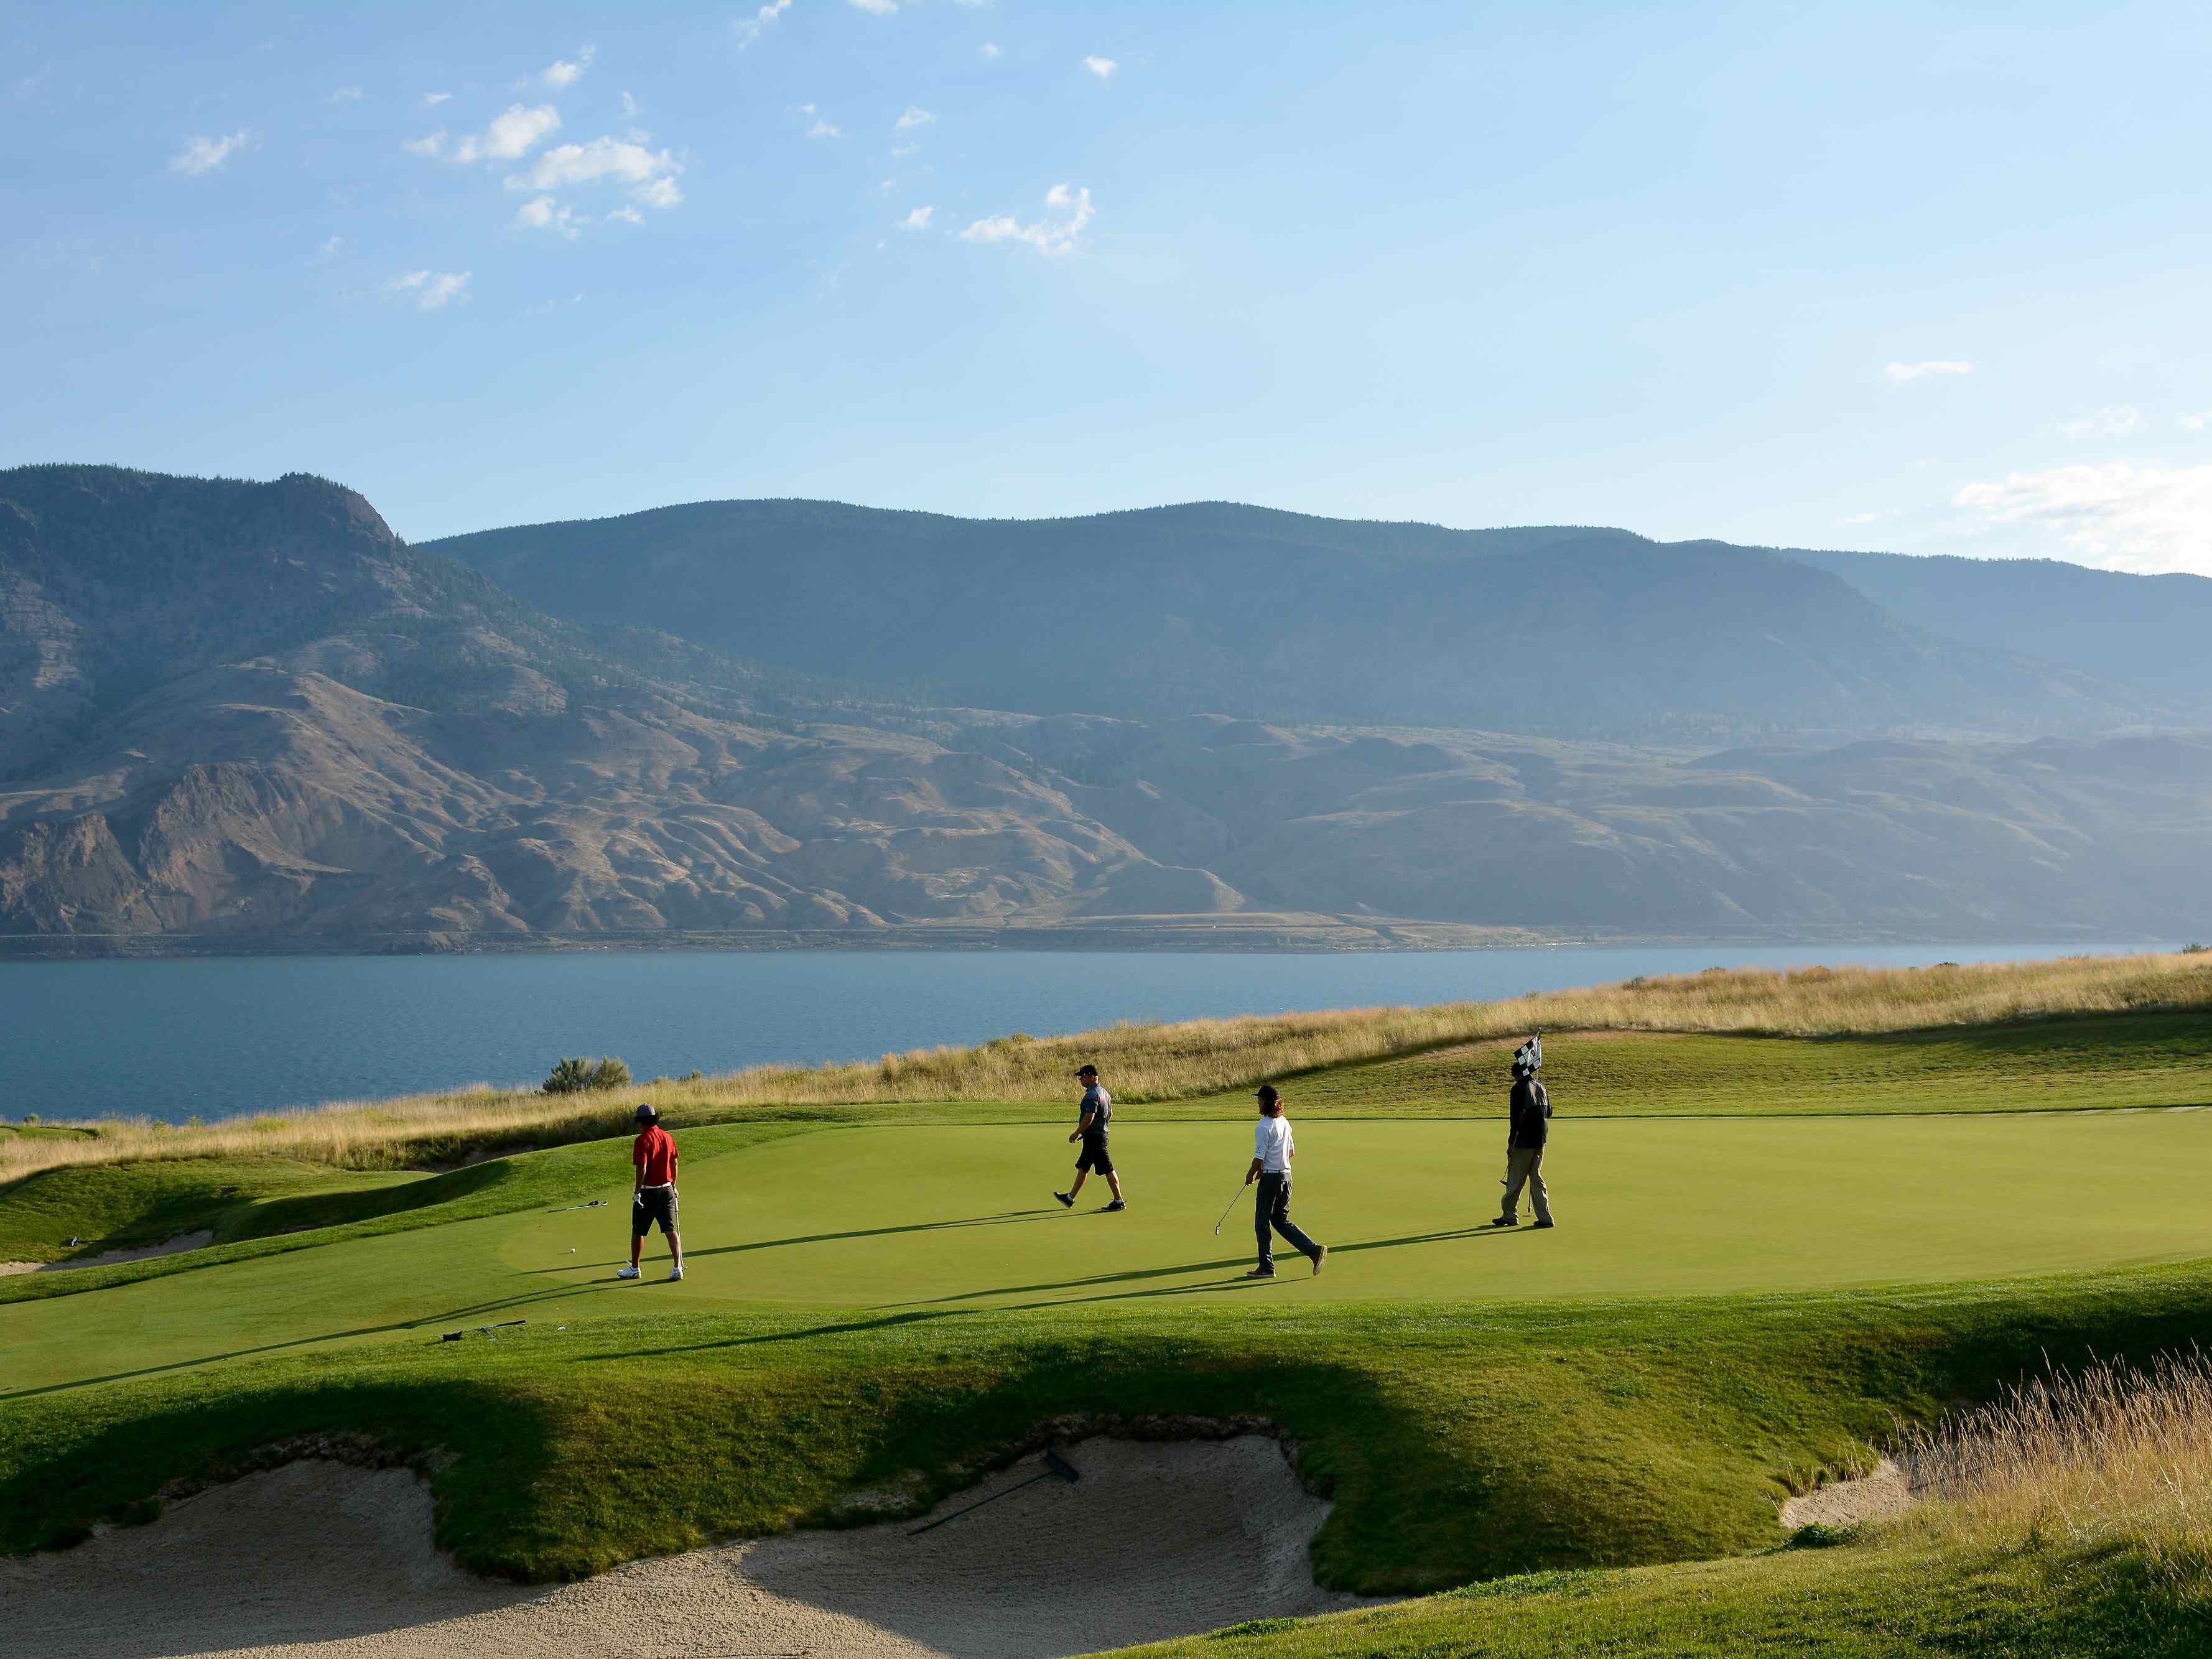 Tobiano Golf is one of the most picturesque golf courses